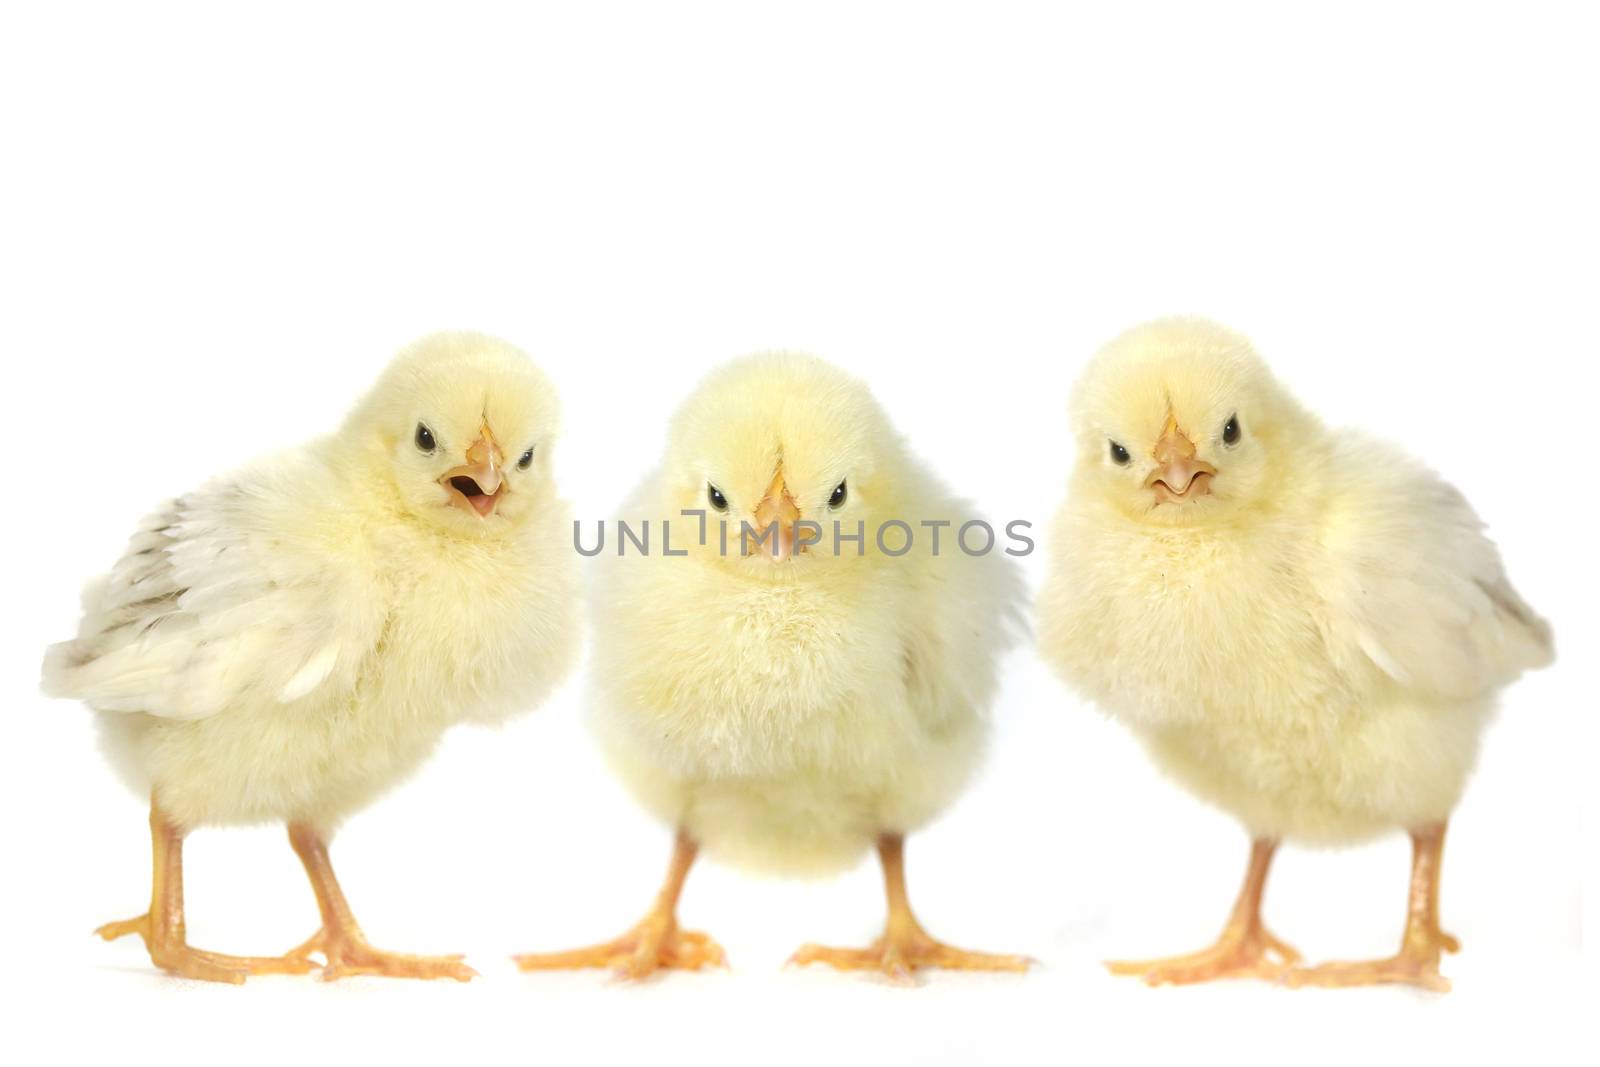 Angry Baby Chicks on White Background by tobkatrina